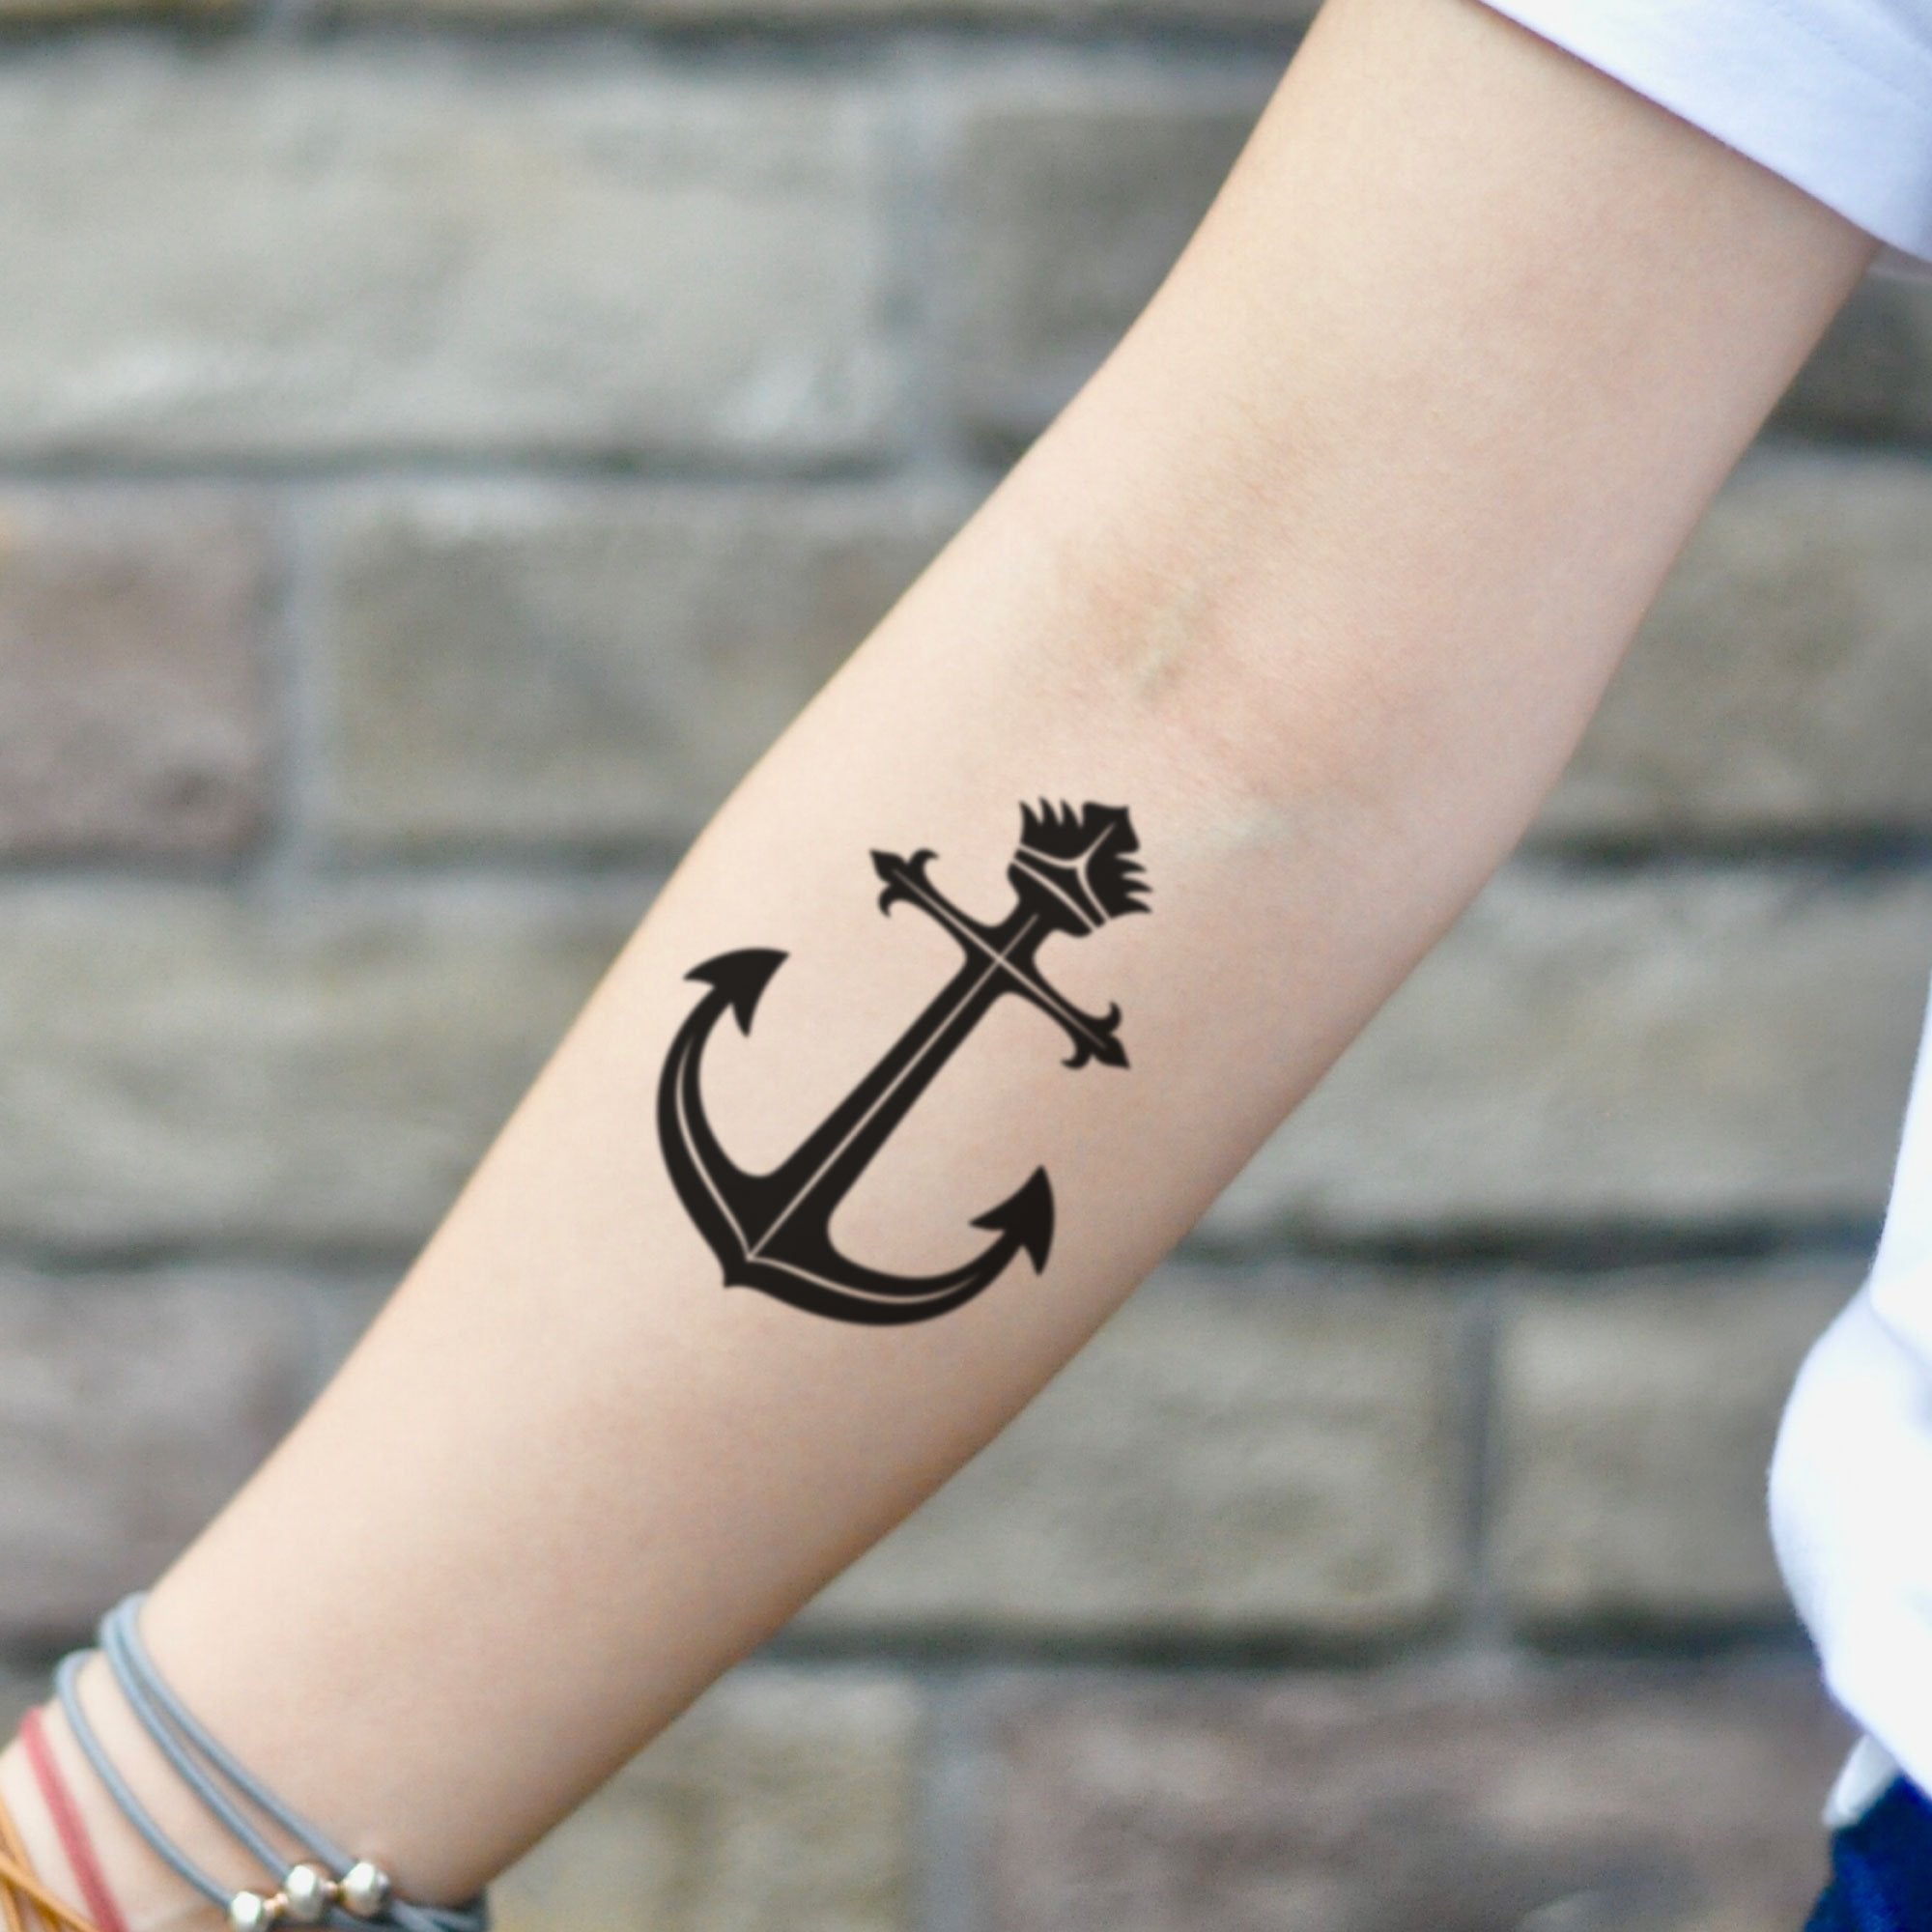 20 minimalist tattoos that inspire you to get inked | Lifestyle Gallery  News - The Indian Express